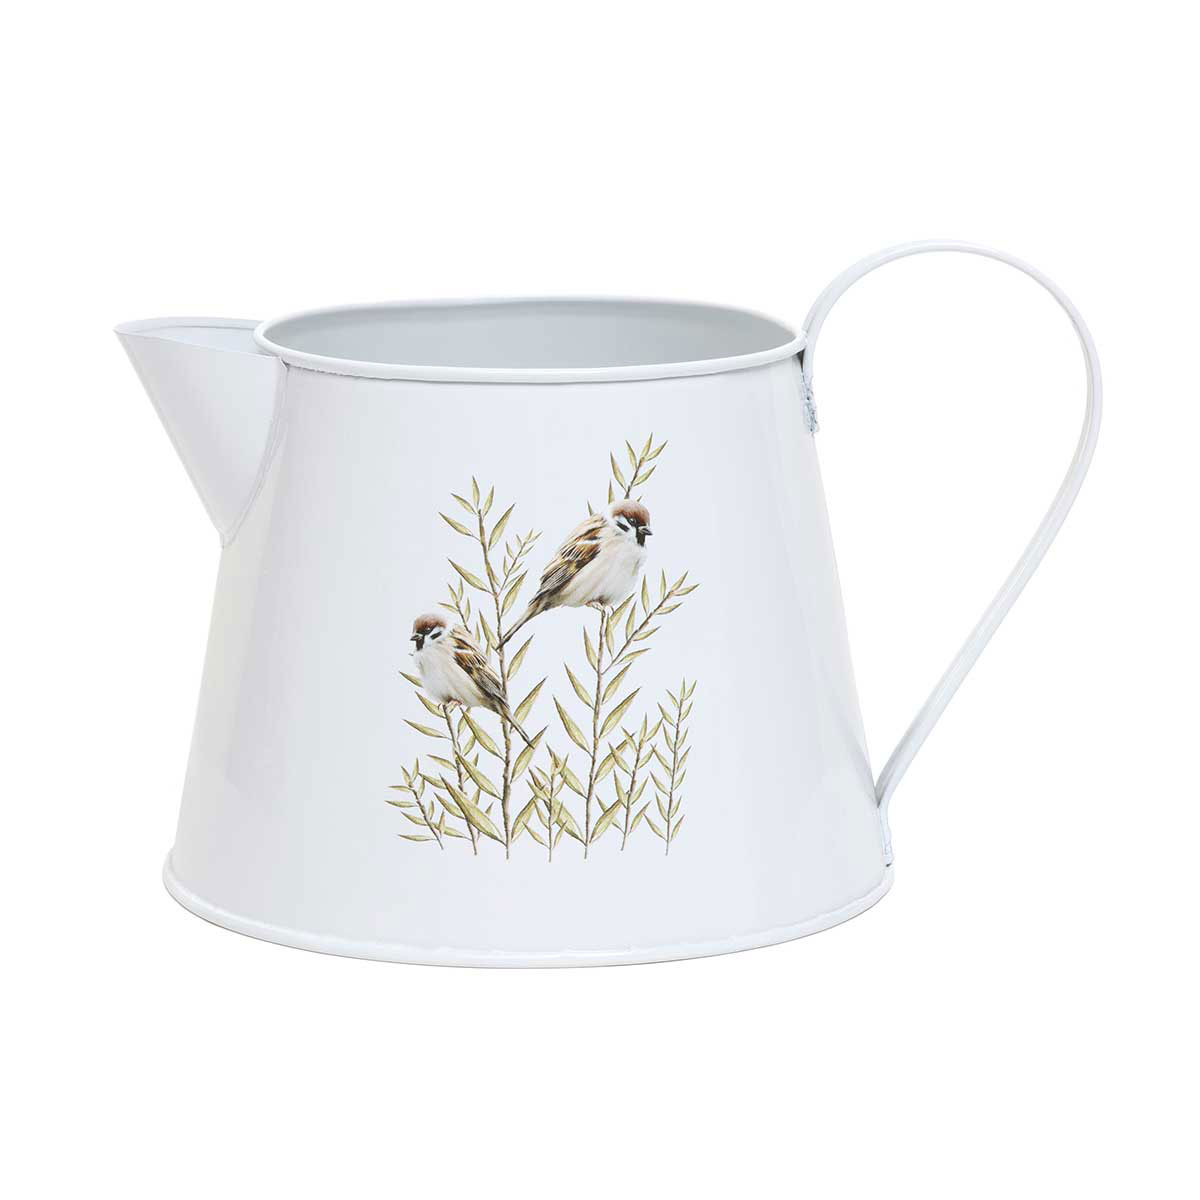 BIRDS ON TWIG METAL PITCHER WHITE WITH HANDLE 8.5"X6.5"X5.5"